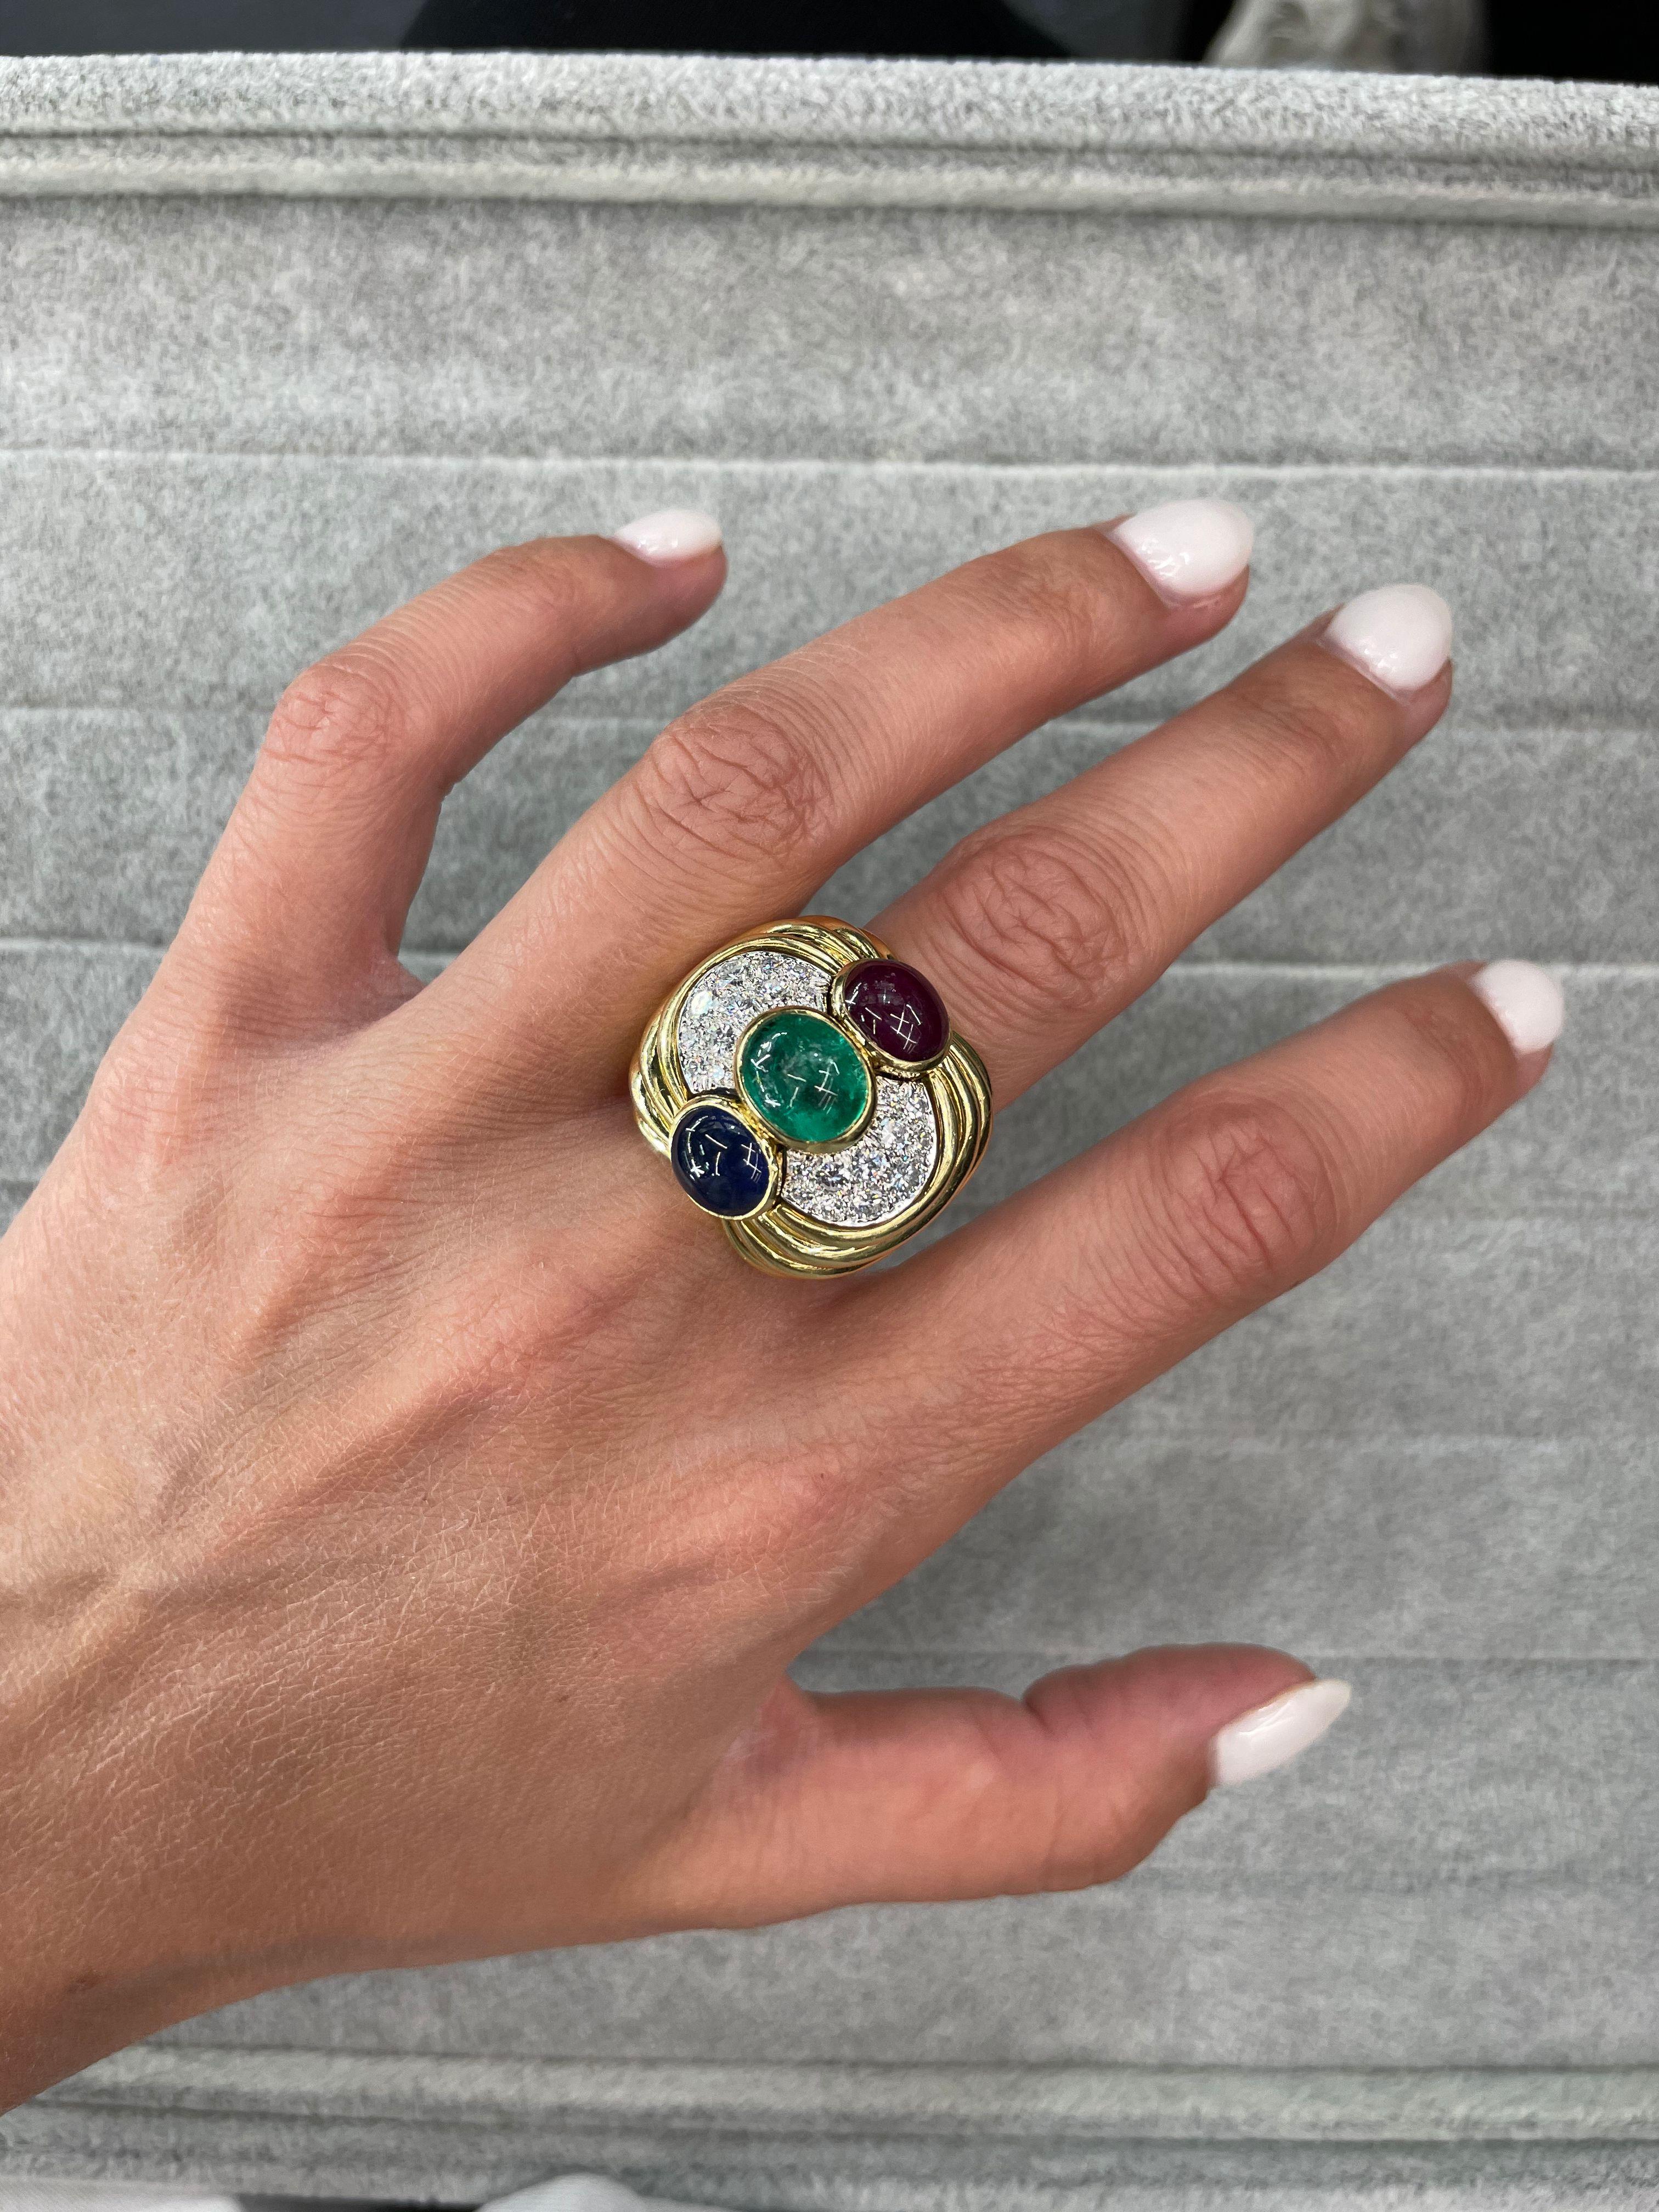 Abslutely stunning ring by David Webb comes to us from the 70's but it looks like it could've been manufactured yesterday. 

It is in perfect condition and features three lovely gems: a ruby, an emerald and a sapphire nested one above the other in a